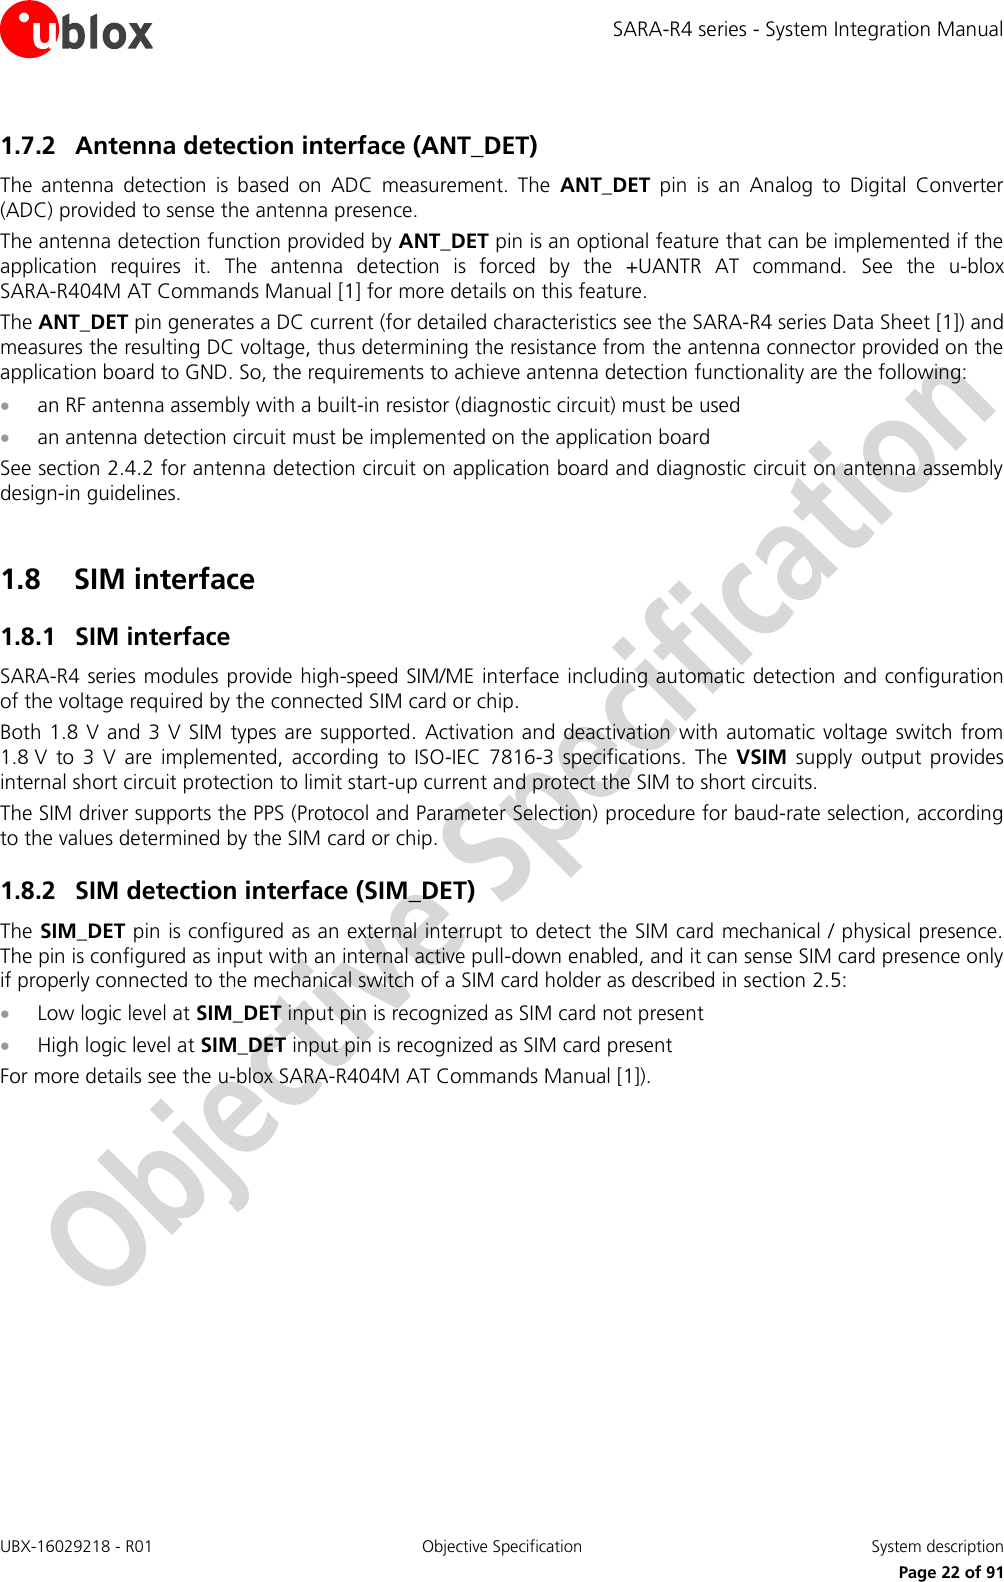 SARA-R4 series - System Integration Manual UBX-16029218 - R01  Objective Specification  System description     Page 22 of 91 1.7.2 Antenna detection interface (ANT_DET) The  antenna  detection  is  based  on  ADC  measurement.  The  ANT_DET  pin  is  an  Analog  to  Digital  Converter (ADC) provided to sense the antenna presence. The antenna detection function provided by ANT_DET pin is an optional feature that can be implemented if the application  requires  it.  The  antenna  detection  is  forced  by  the  +UANTR  AT  command.  See  the  u-blox SARA-R404M AT Commands Manual [1] for more details on this feature. The ANT_DET pin generates a DC current (for detailed characteristics see the SARA-R4 series Data Sheet [1]) and measures the resulting DC voltage, thus determining the resistance from the antenna connector provided on the application board to GND. So, the requirements to achieve antenna detection functionality are the following:  an RF antenna assembly with a built-in resistor (diagnostic circuit) must be used  an antenna detection circuit must be implemented on the application board See section 2.4.2 for antenna detection circuit on application board and diagnostic circuit on antenna assembly design-in guidelines.  1.8 SIM interface 1.8.1 SIM interface SARA-R4 series modules provide high-speed SIM/ME interface including automatic detection and configuration of the voltage required by the connected SIM card or chip. Both 1.8 V and 3 V SIM types  are  supported. Activation  and  deactivation with automatic voltage  switch from 1.8 V  to  3  V  are  implemented,  according  to  ISO-IEC  7816-3  specifications.  The  VSIM  supply  output  provides internal short circuit protection to limit start-up current and protect the SIM to short circuits. The SIM driver supports the PPS (Protocol and Parameter Selection) procedure for baud-rate selection, according to the values determined by the SIM card or chip. 1.8.2 SIM detection interface (SIM_DET) The SIM_DET pin is configured as an external interrupt to detect the SIM card mechanical / physical presence. The pin is configured as input with an internal active pull-down enabled, and it can sense SIM card presence only if properly connected to the mechanical switch of a SIM card holder as described in section 2.5:  Low logic level at SIM_DET input pin is recognized as SIM card not present  High logic level at SIM_DET input pin is recognized as SIM card present For more details see the u-blox SARA-R404M AT Commands Manual [1]).   